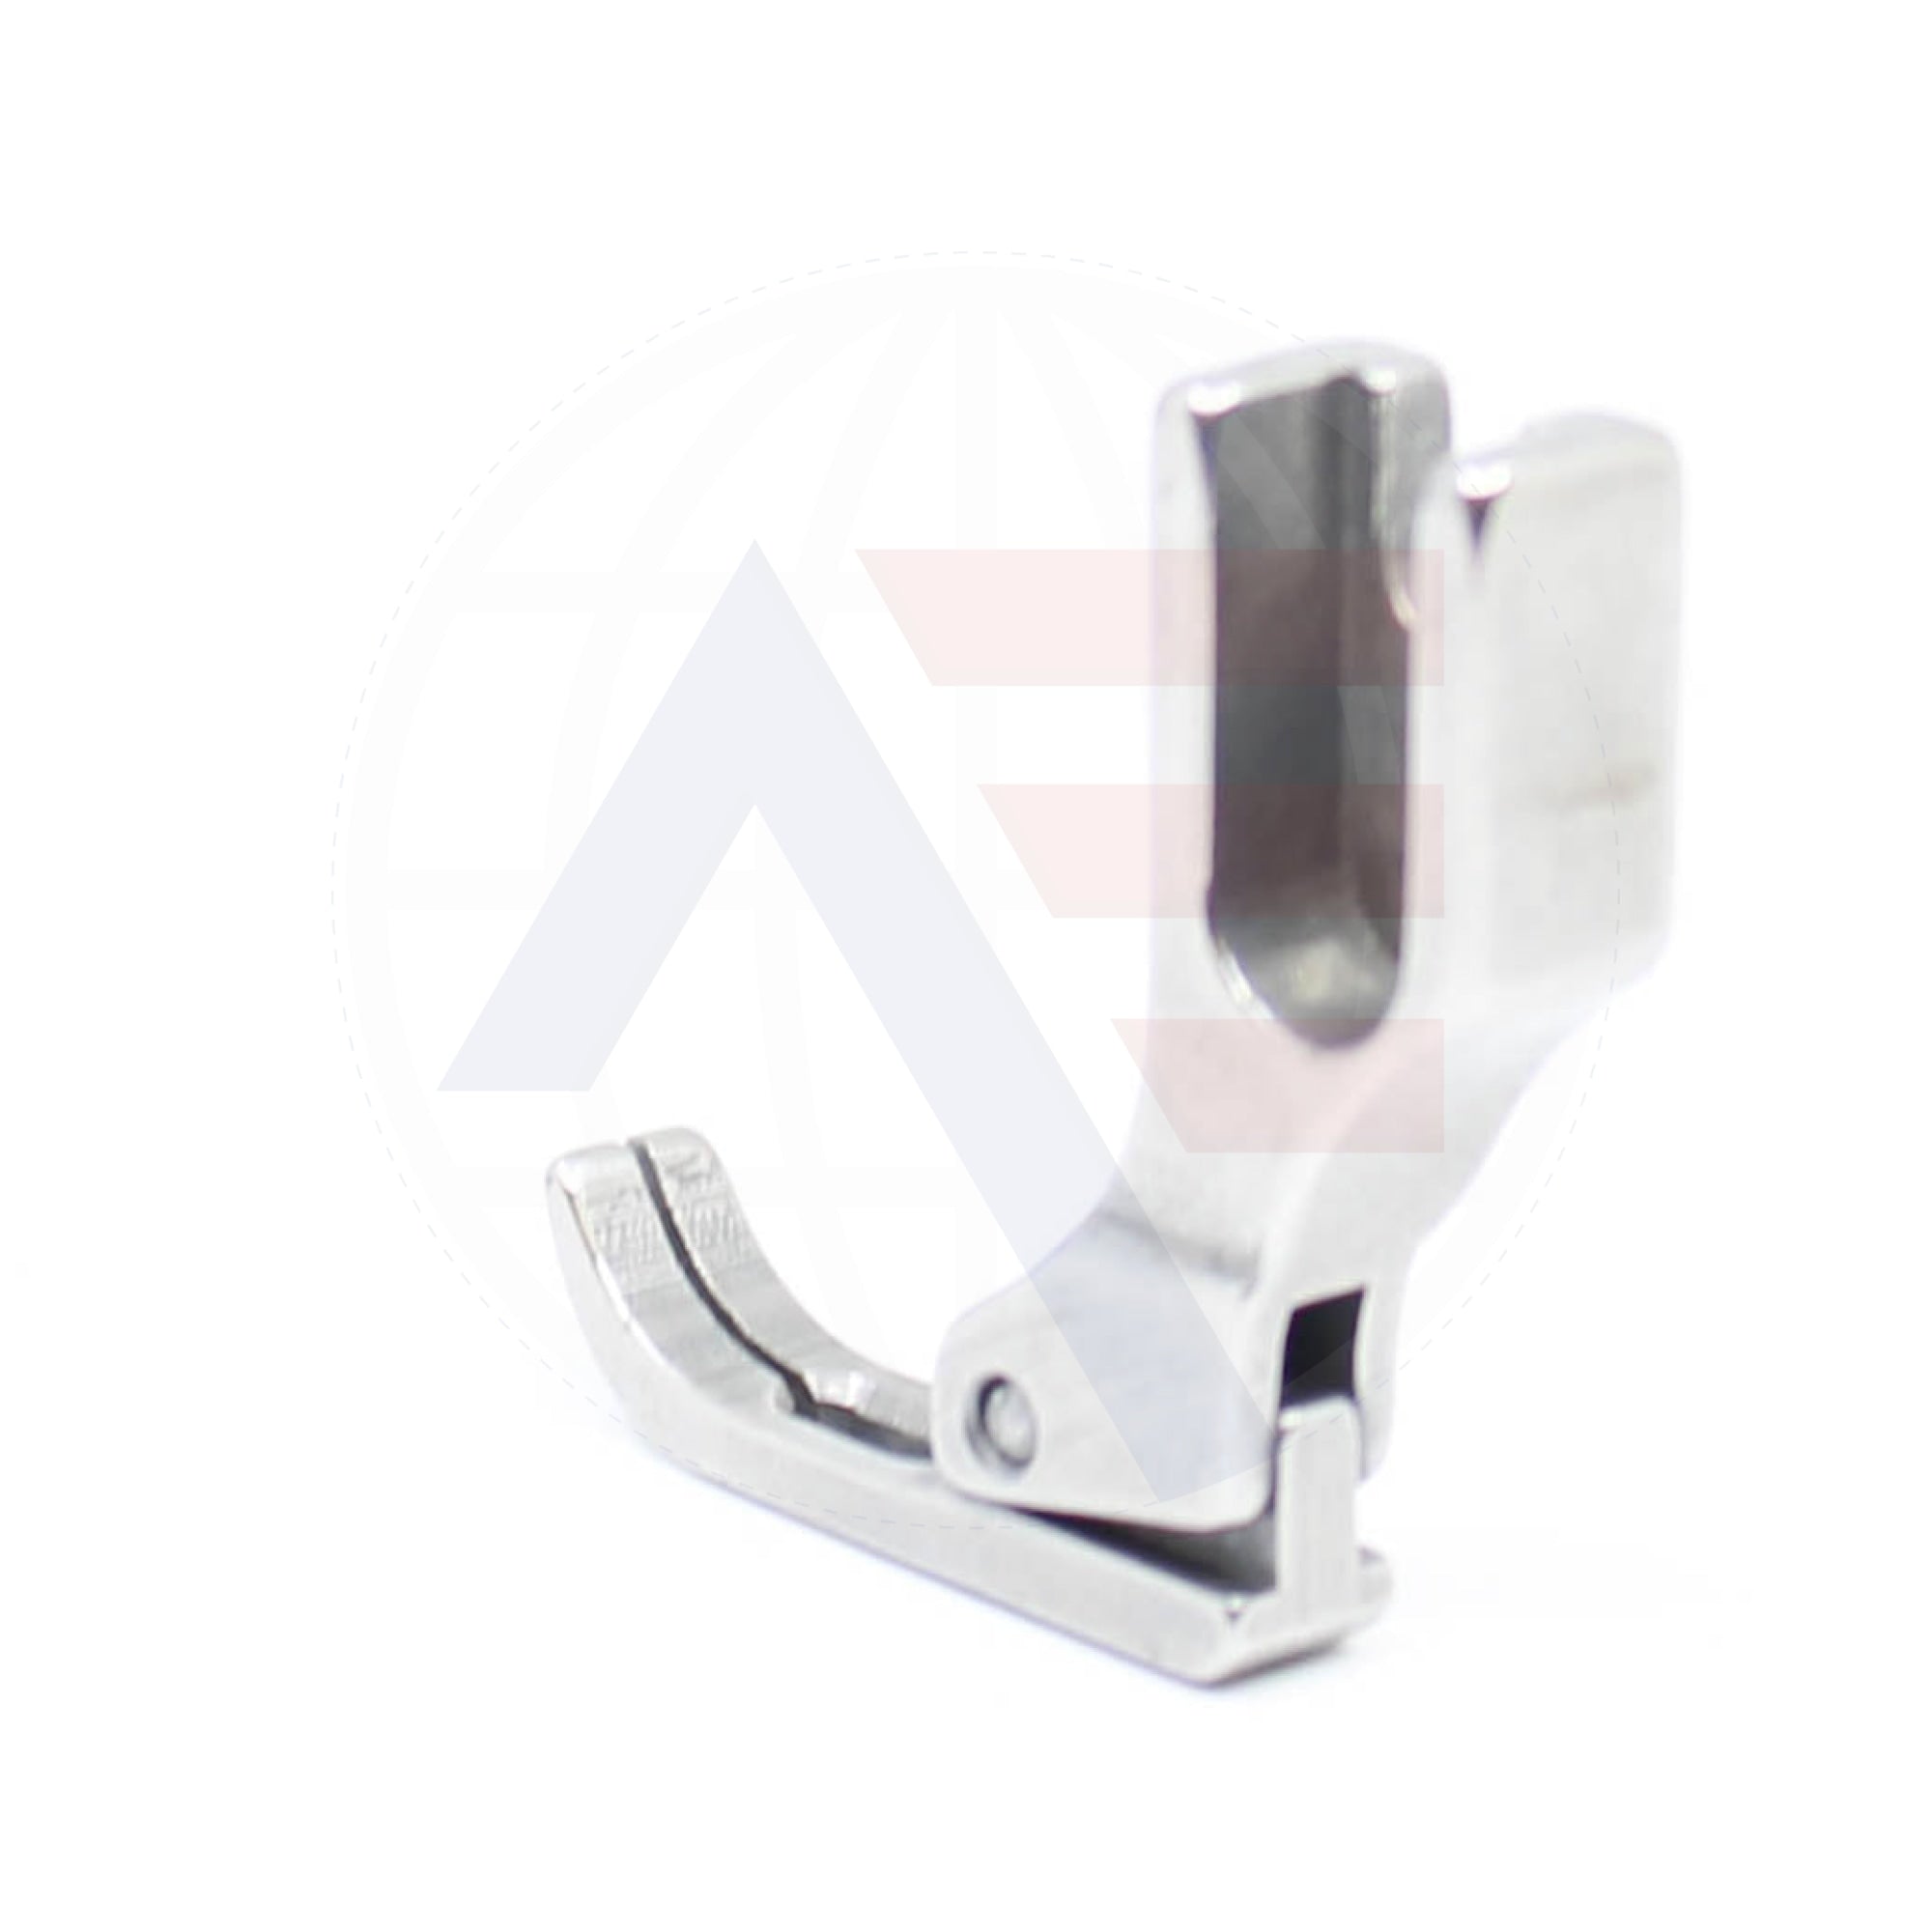 P363Nf Zip Foot Sewing Machine Spare Parts